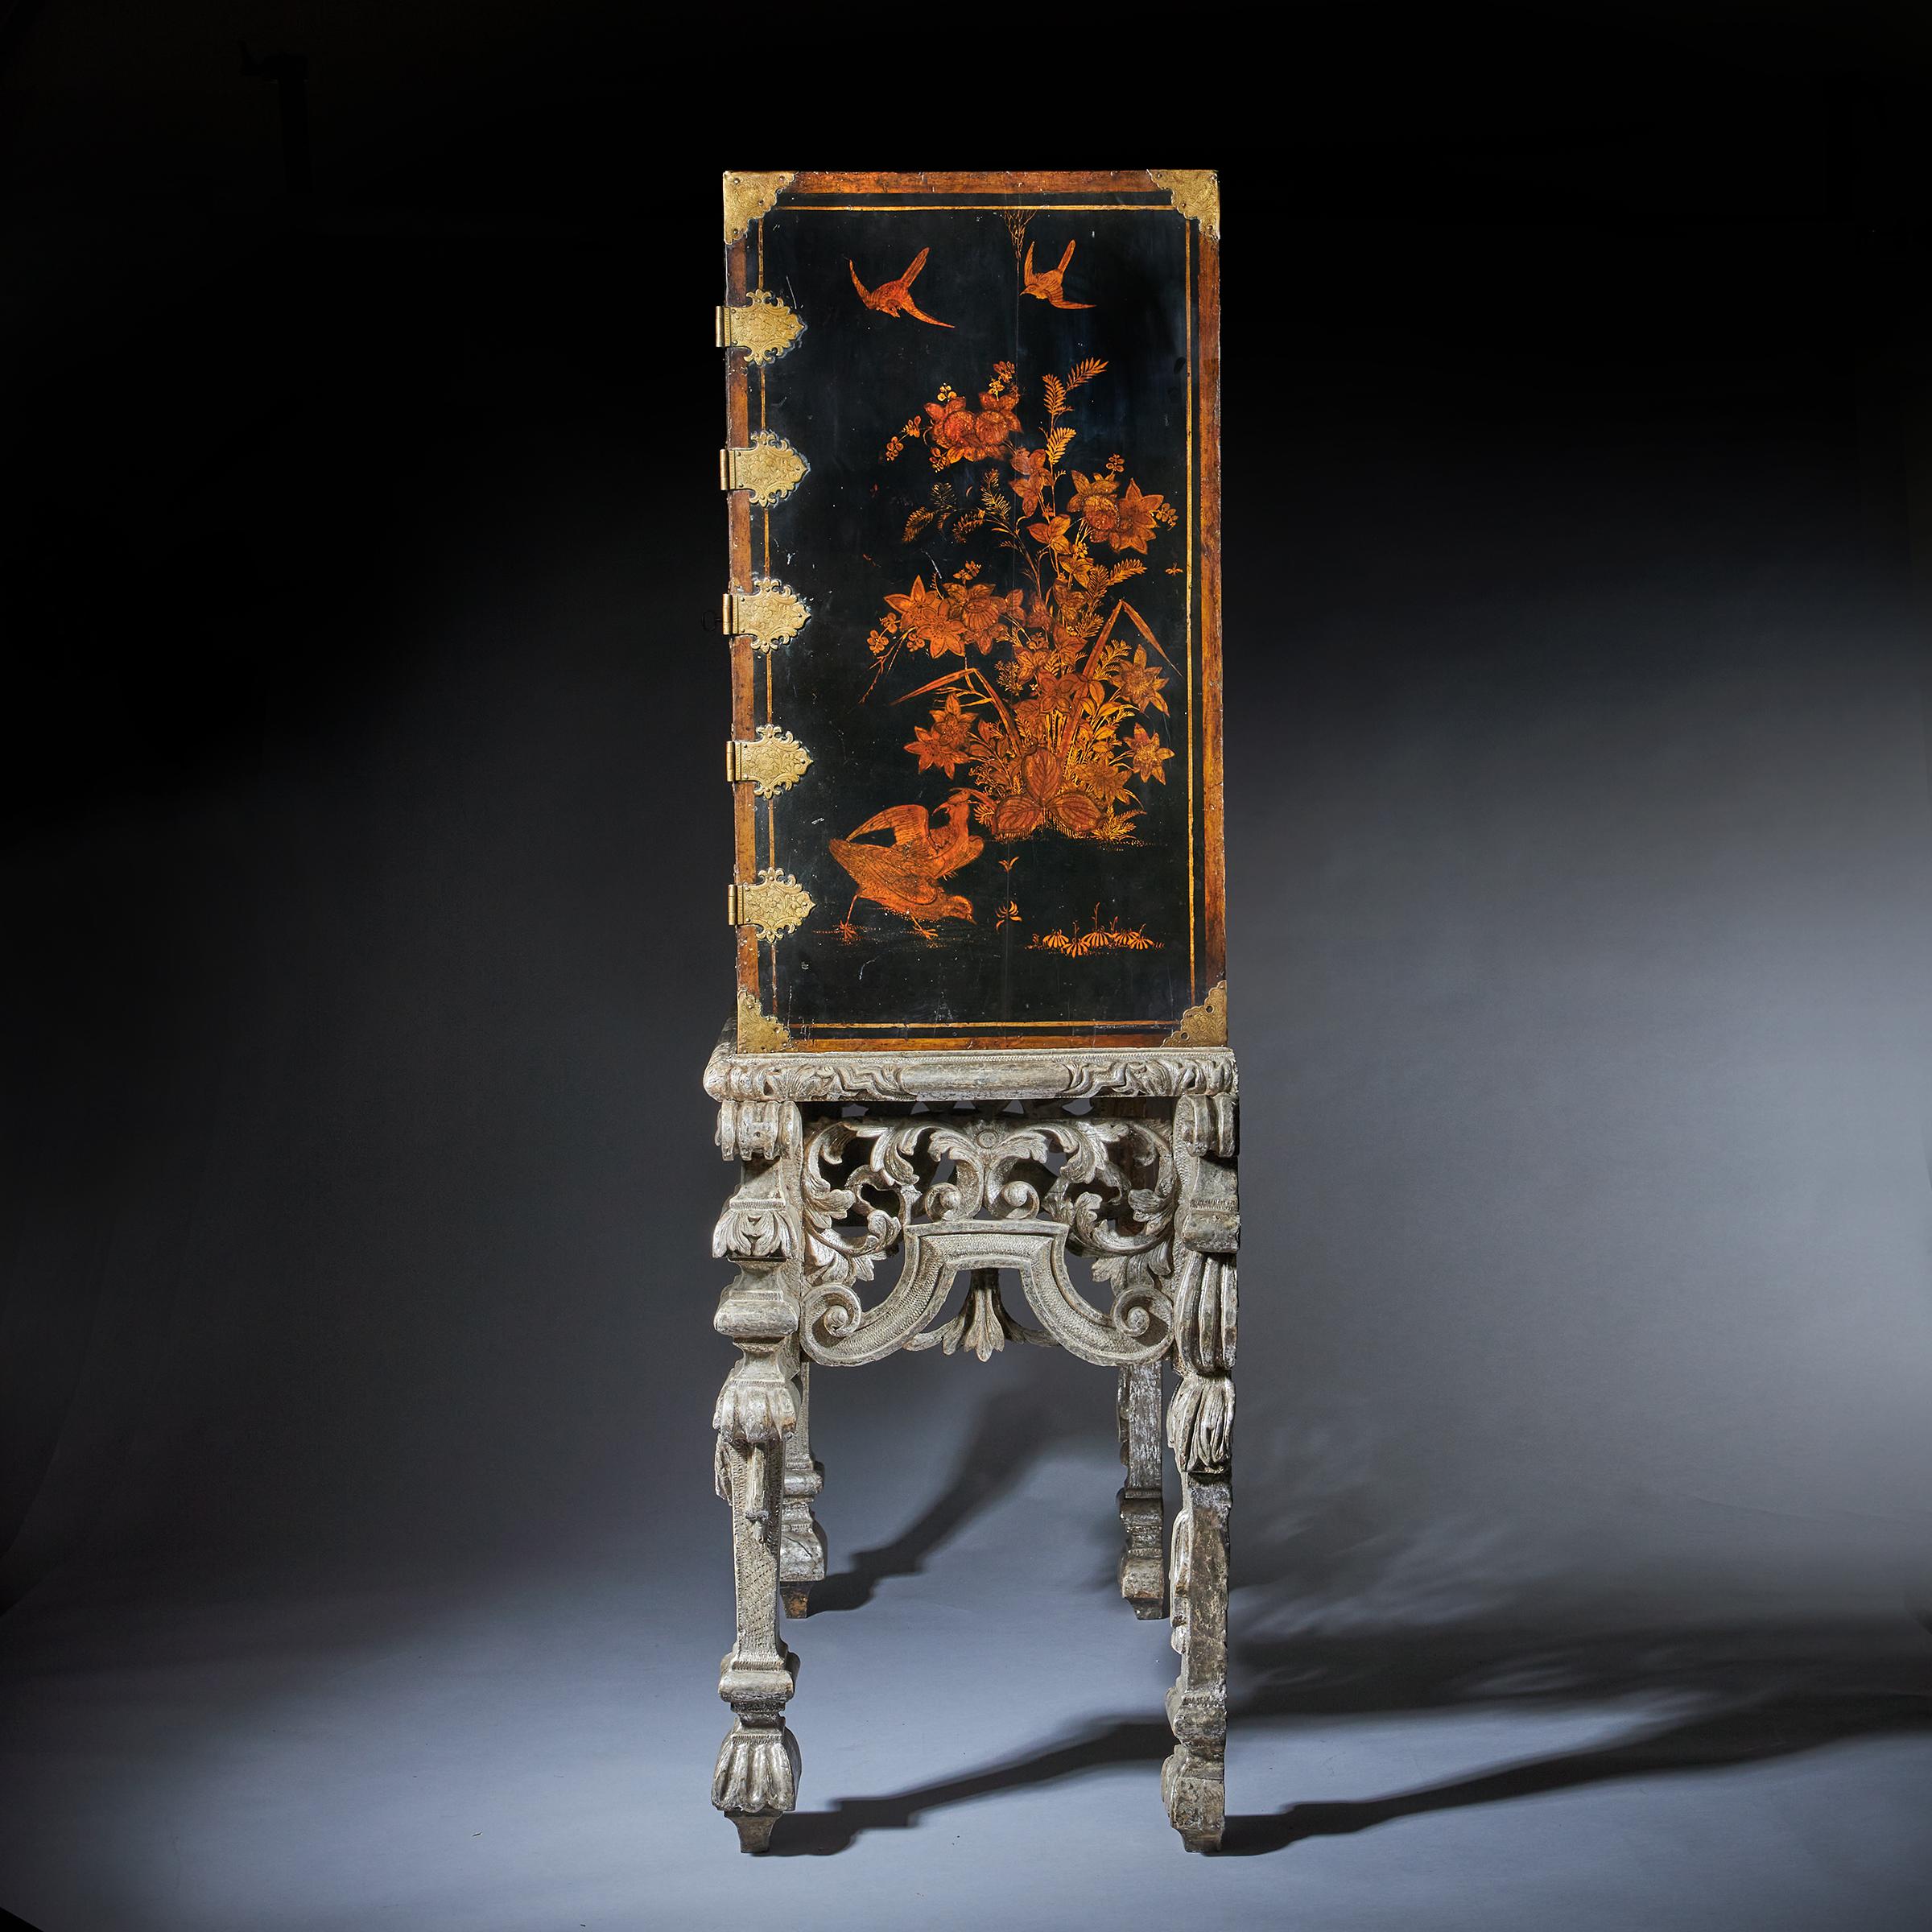 English 17th Century William and Mary Japanned Cabinet on Original Silver Gilt Stand